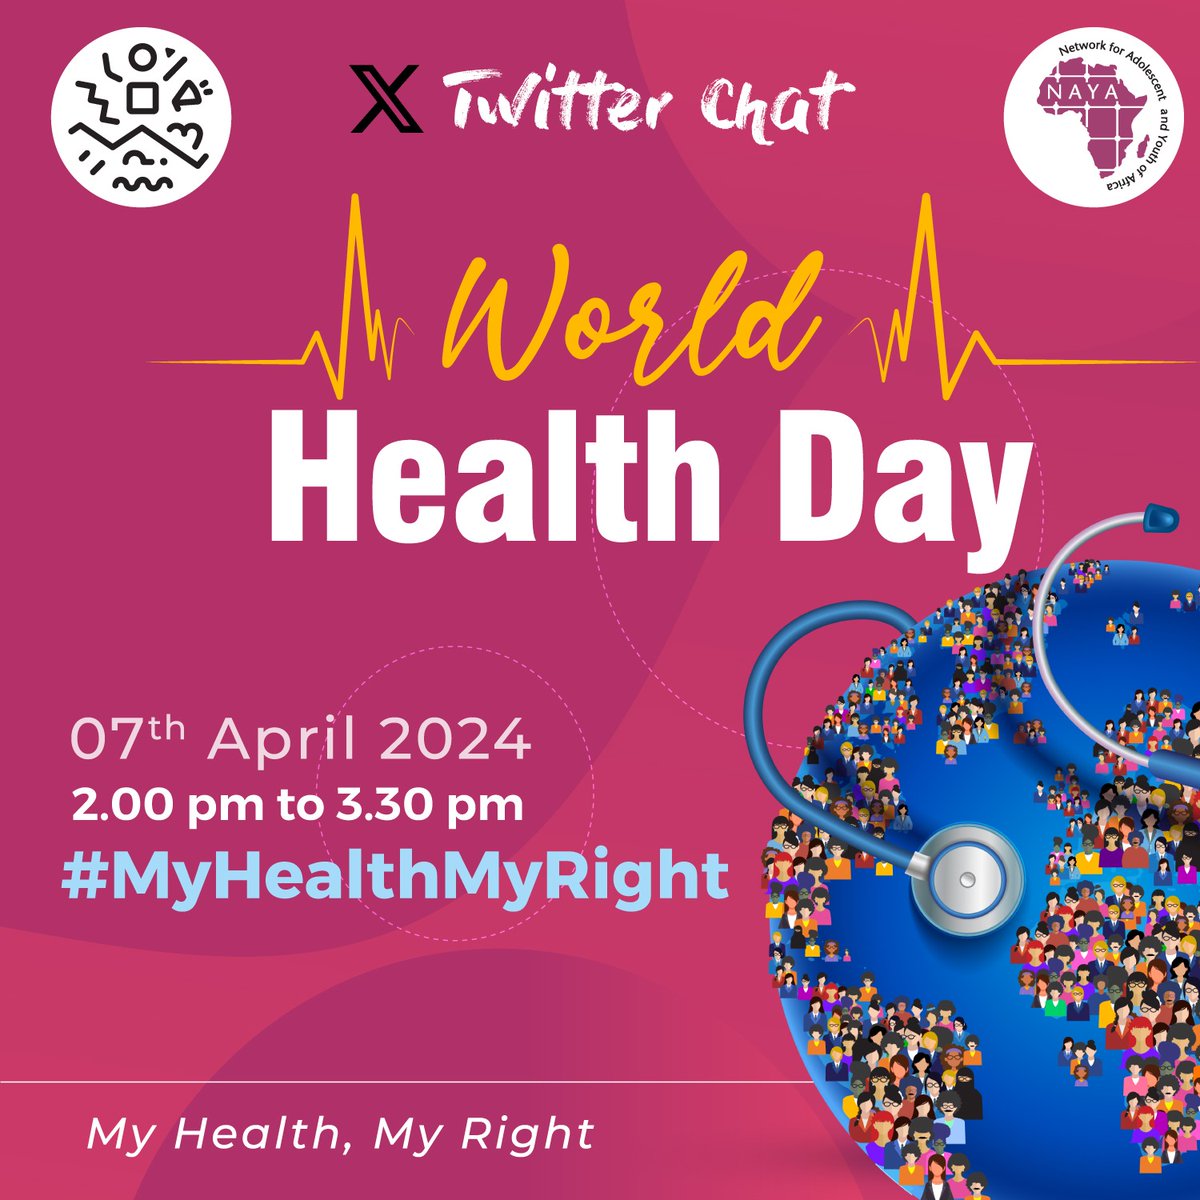 It's happening in a few. My health is my priority,I ought to make informed decisions about it. Join us at the 2pm😊 #MyHealthMyRight @NAYAKenya @RHRNKenya @MOH_Kenya @WHO